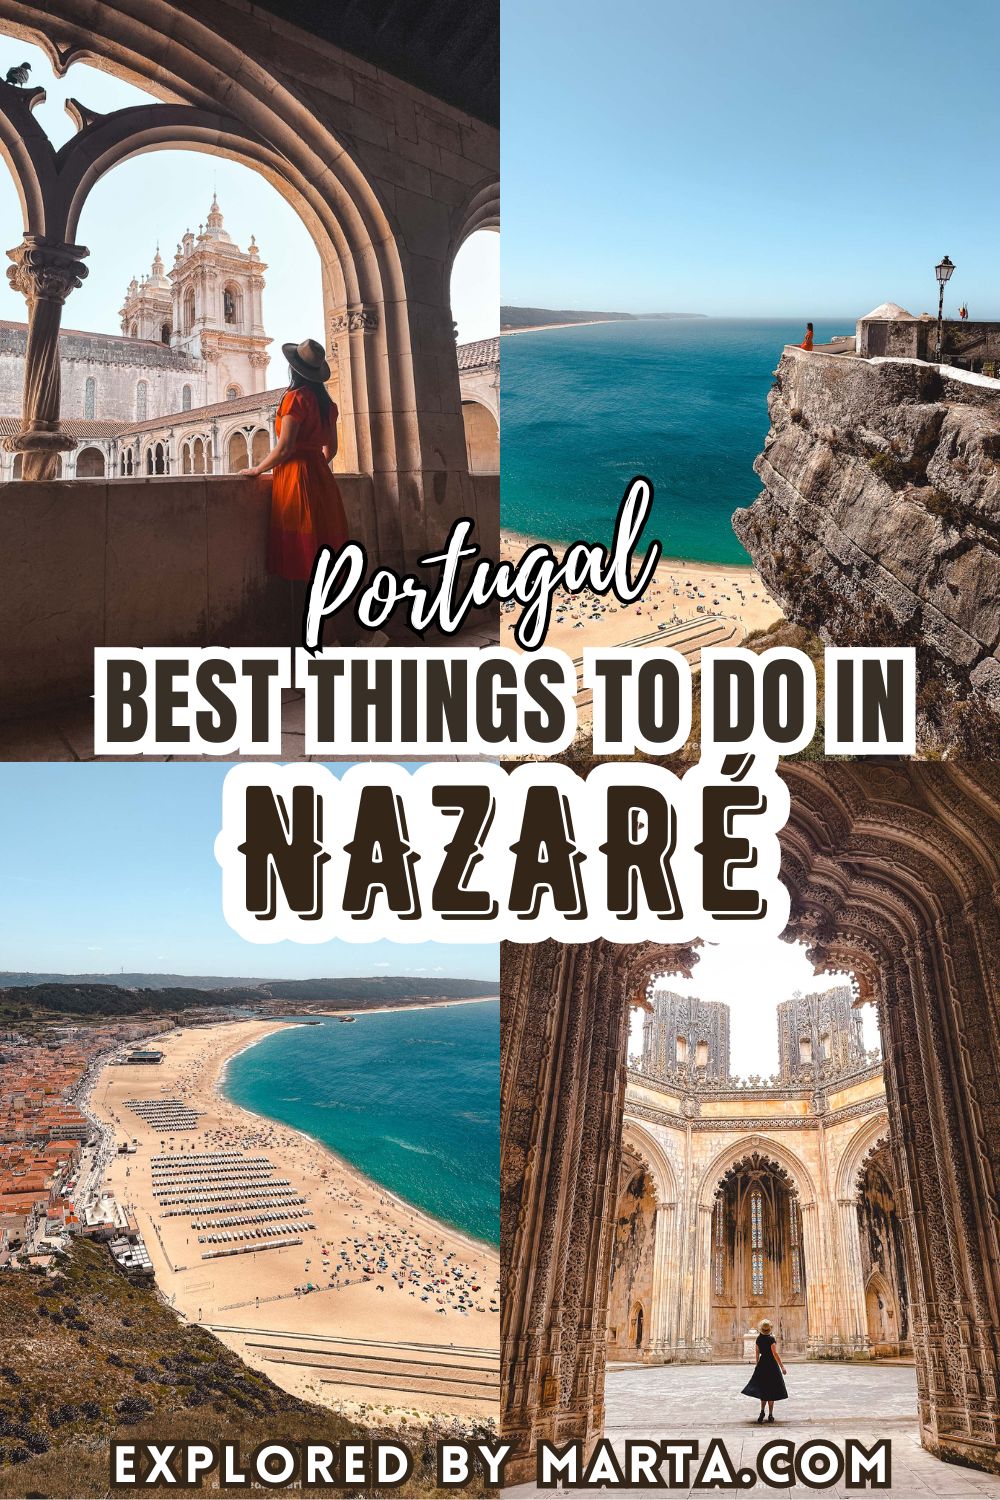 Top things to do in Nazare